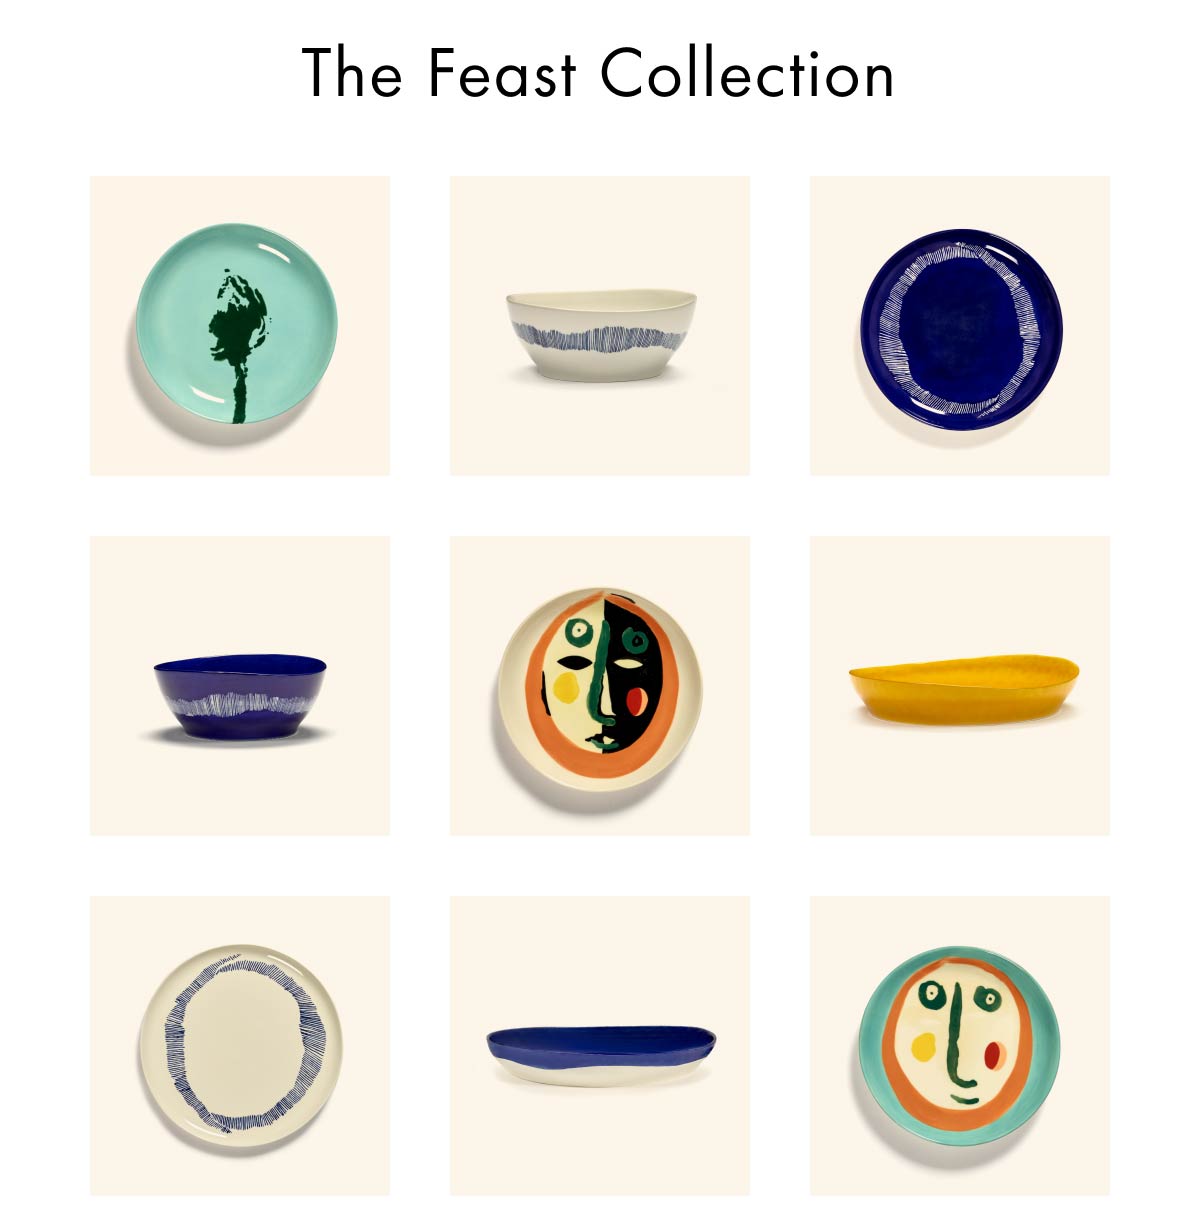 The Feast Collection